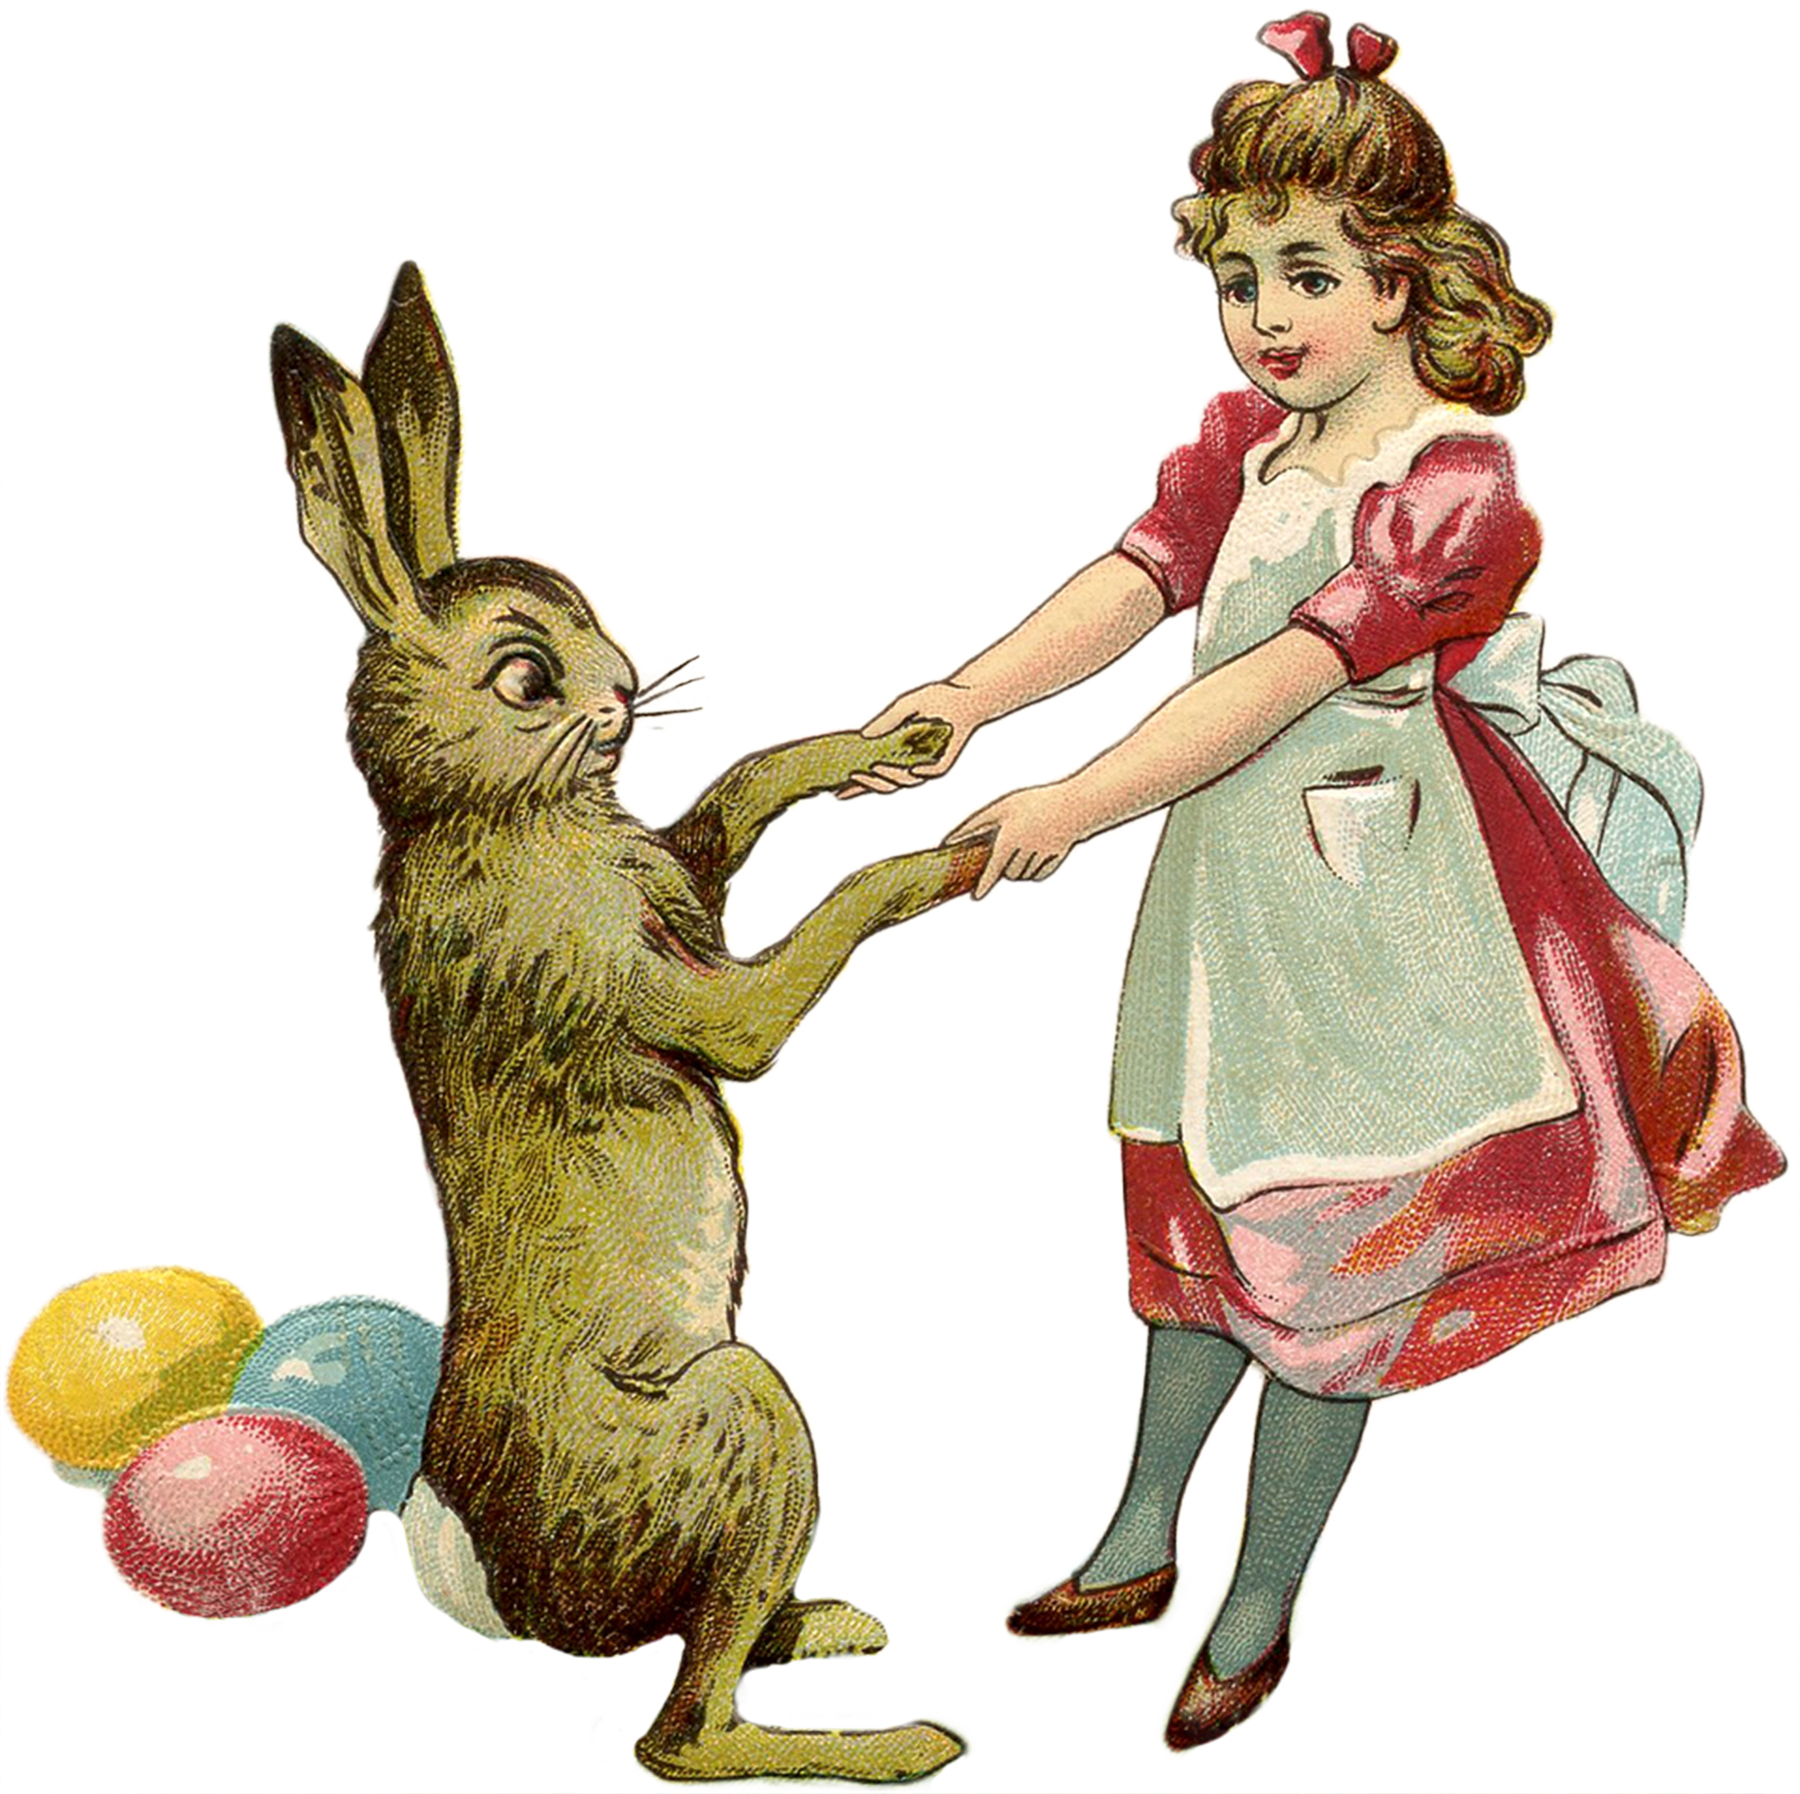 Free Vintage Easter Bunny Images - The Graphics Fairy